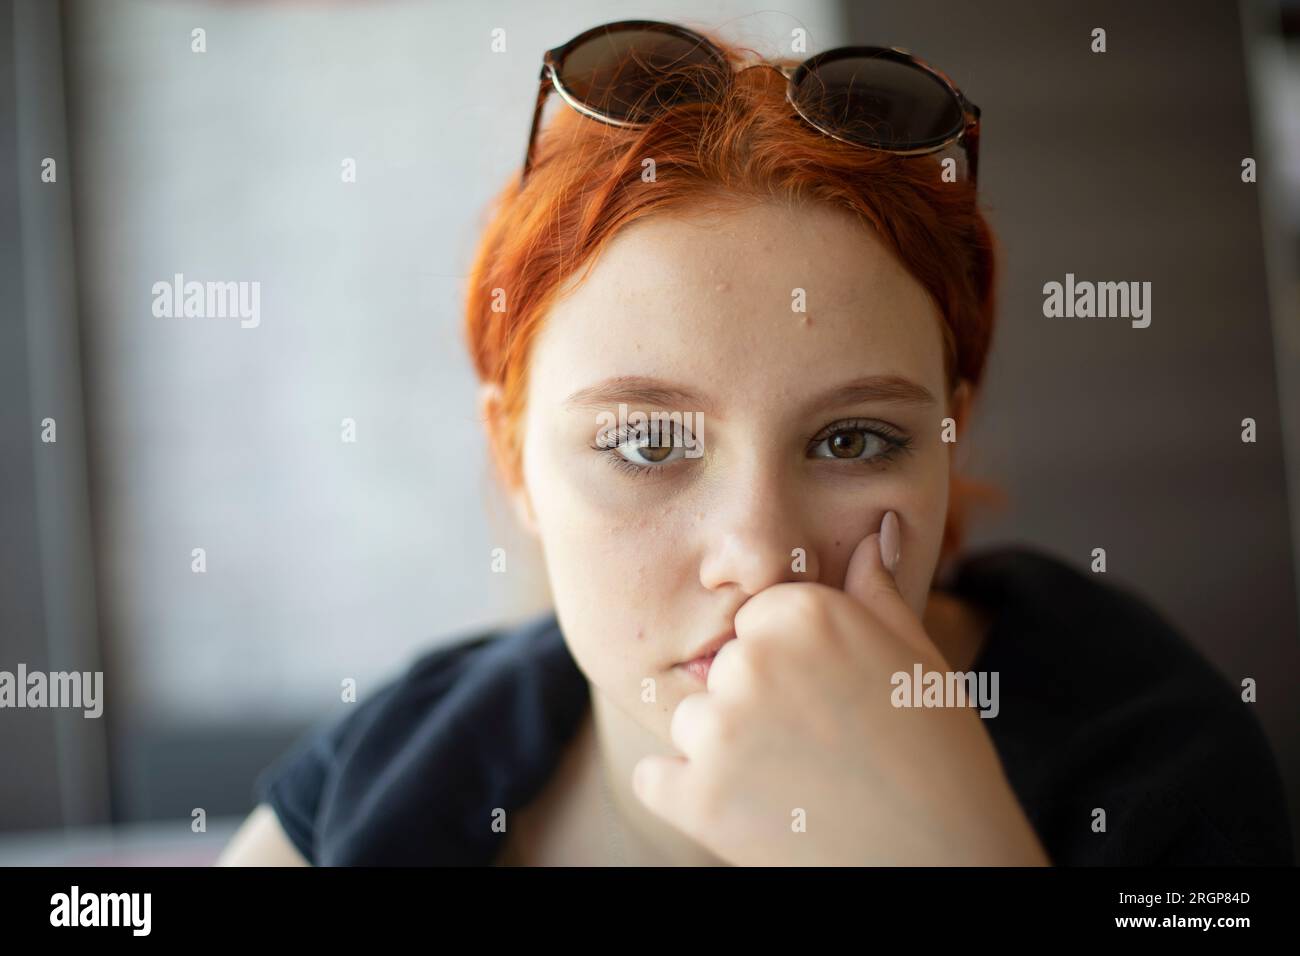 Young girl thinks. Woman's questioning gaze. Stock Photo